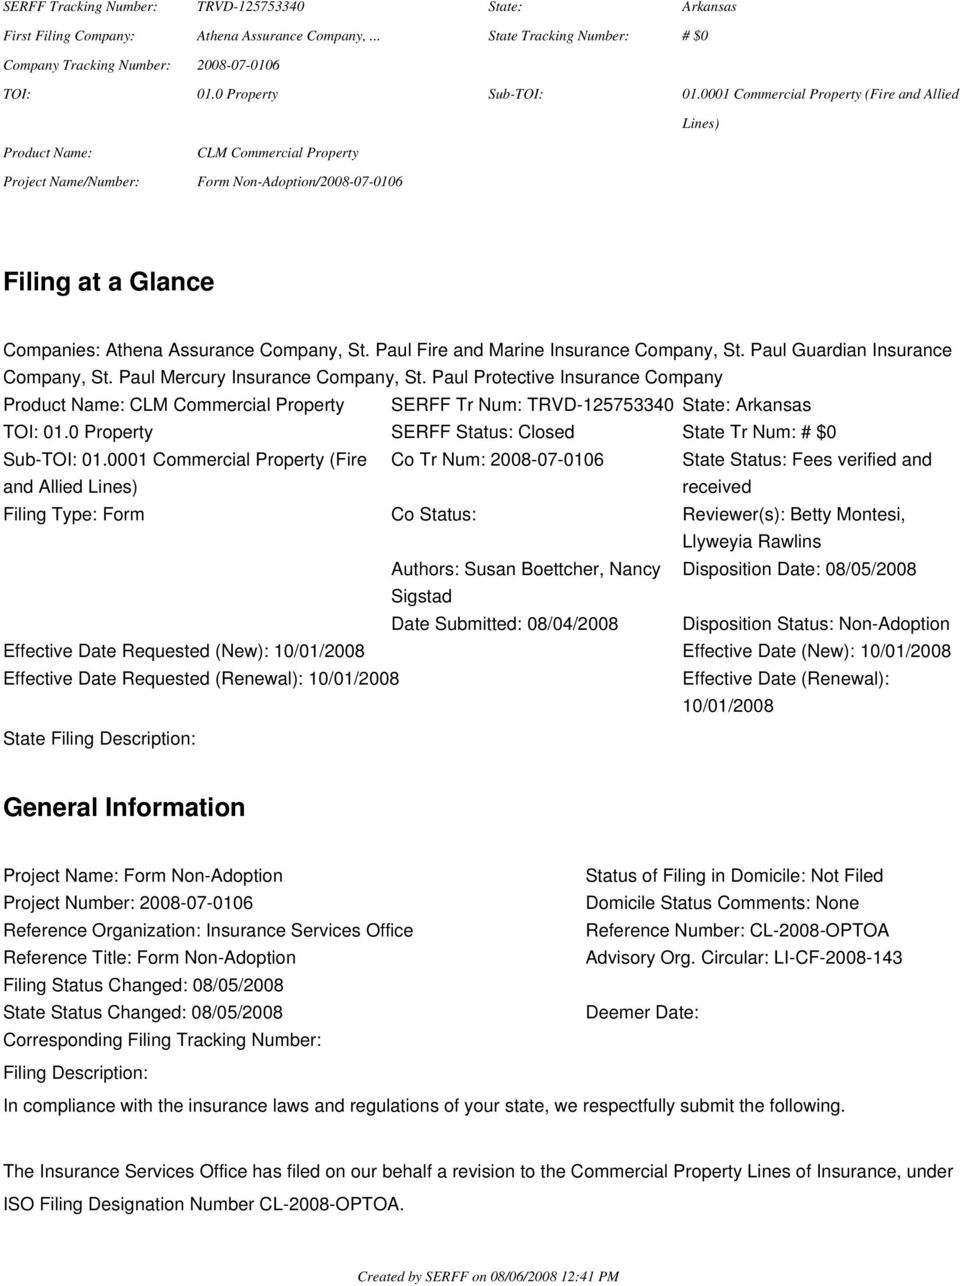 0001 Commercial Property (Fire and Allied Co Tr Num: 2008-07-0106 State Status: Fees verified and received Filing Type: Form Co Status: Reviewer(s): Betty Montesi, Llyweyia Rawlins Authors: Susan